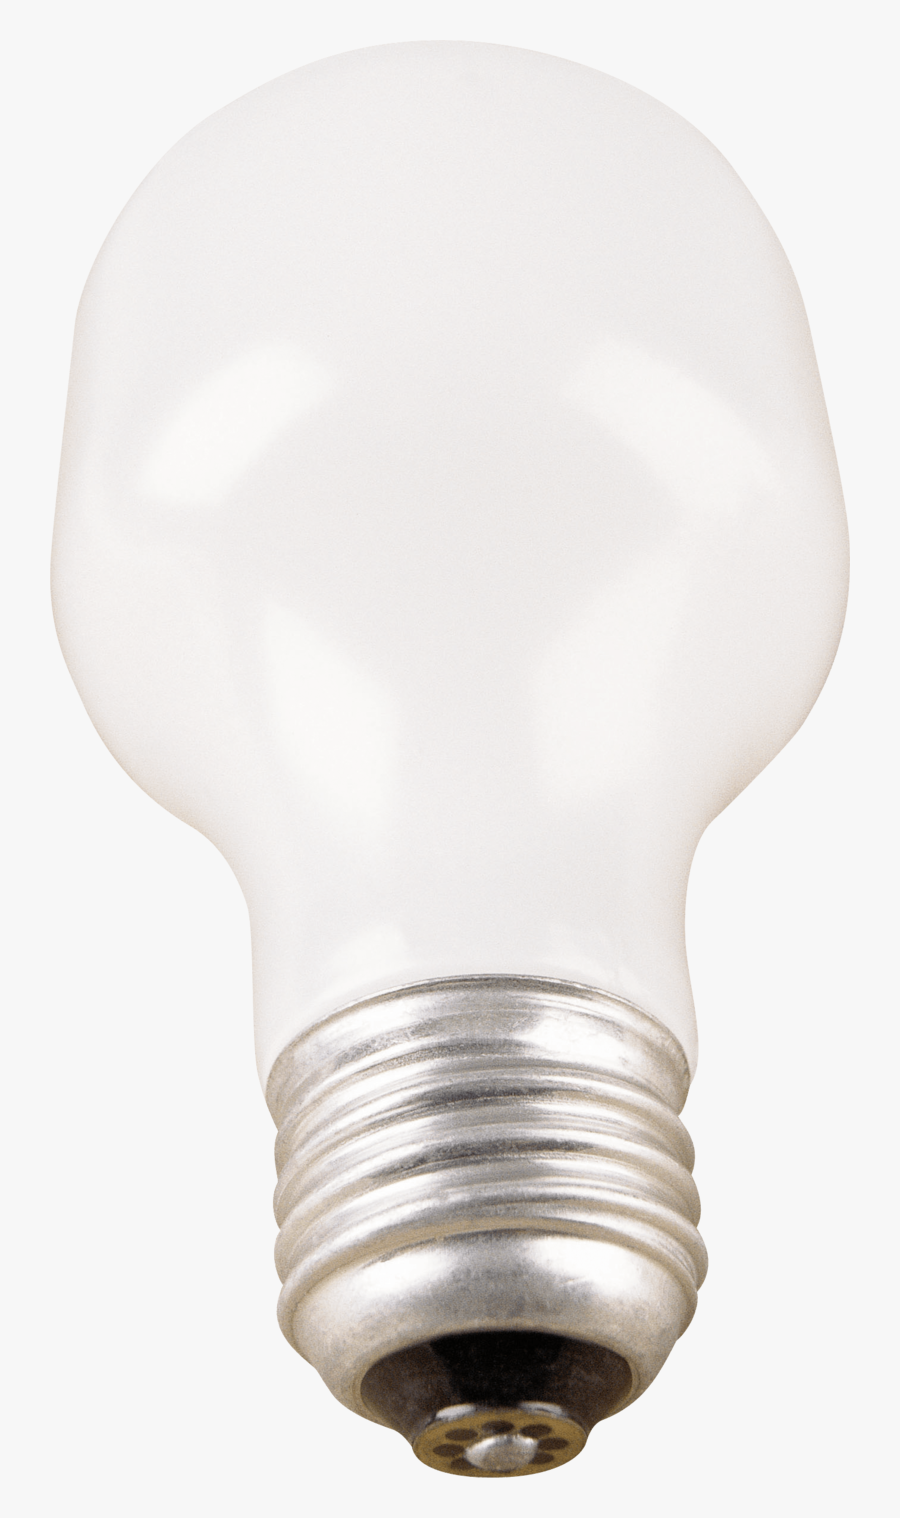 Lamp Png Image - Electricity Bulb Gif Png, Transparent Clipart